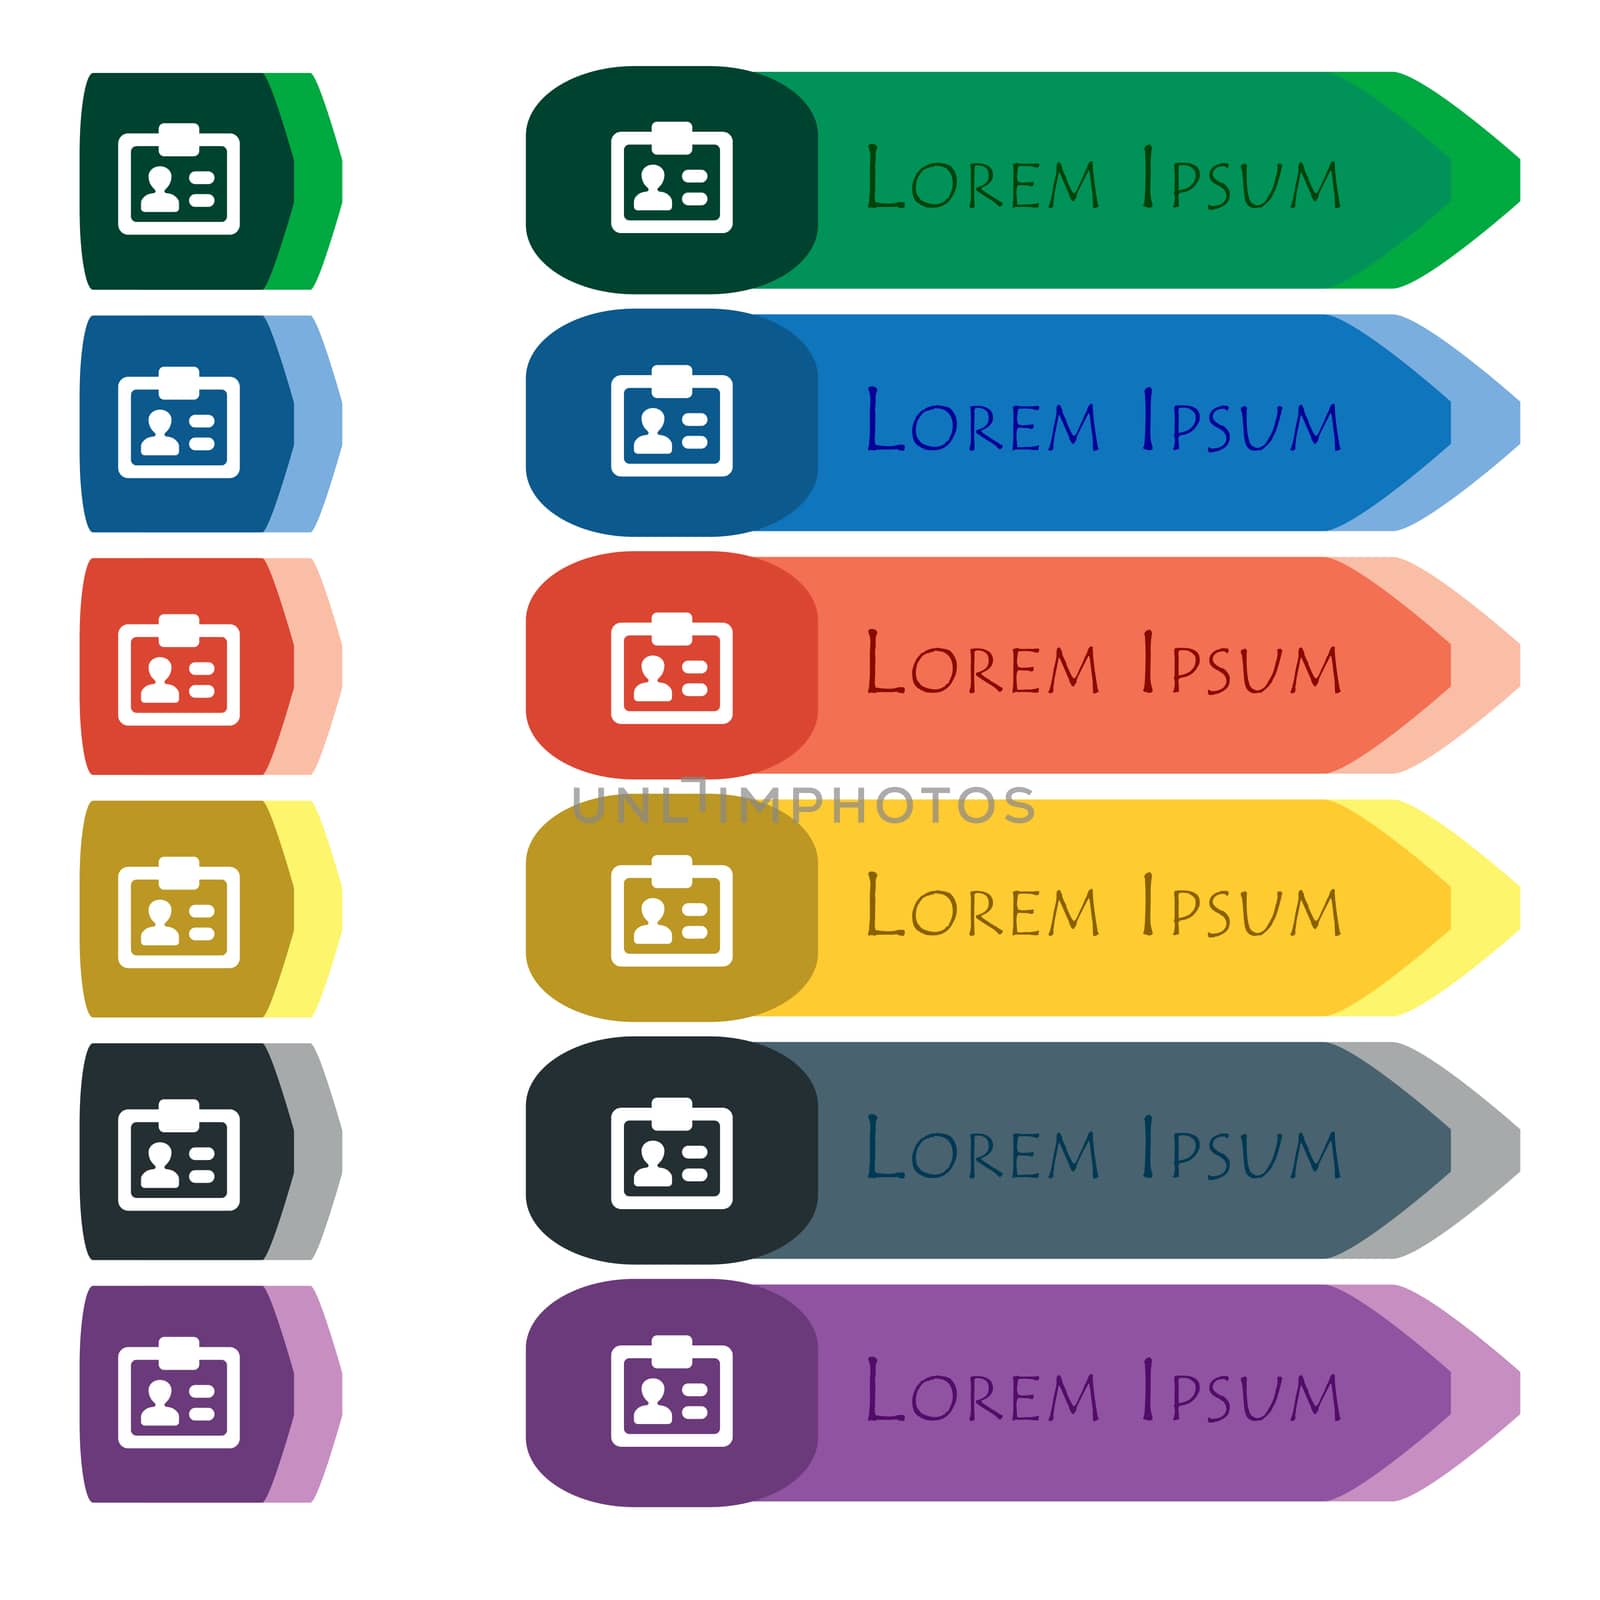 ID, Identity card icon sign. Set of colorful, bright long buttons with additional small modules. Flat design. 